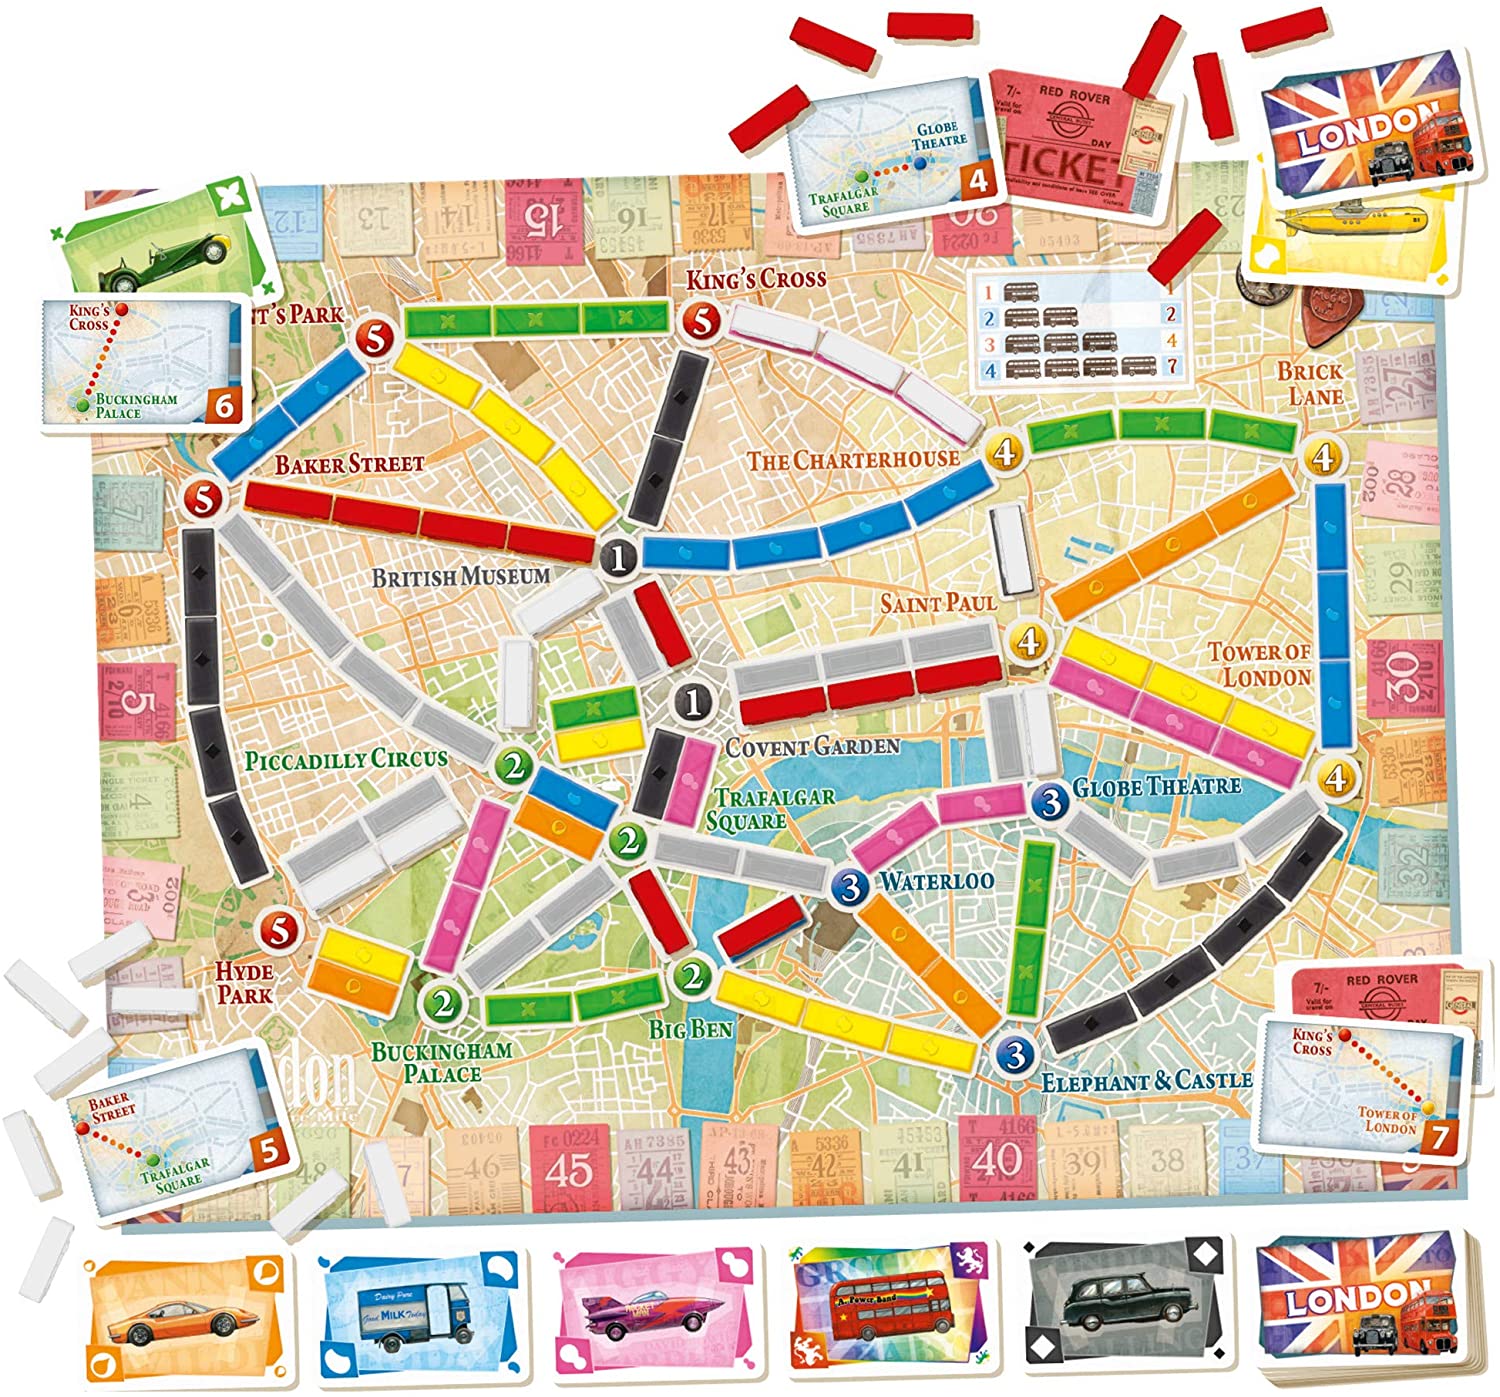 Ticket To Ride London Edition